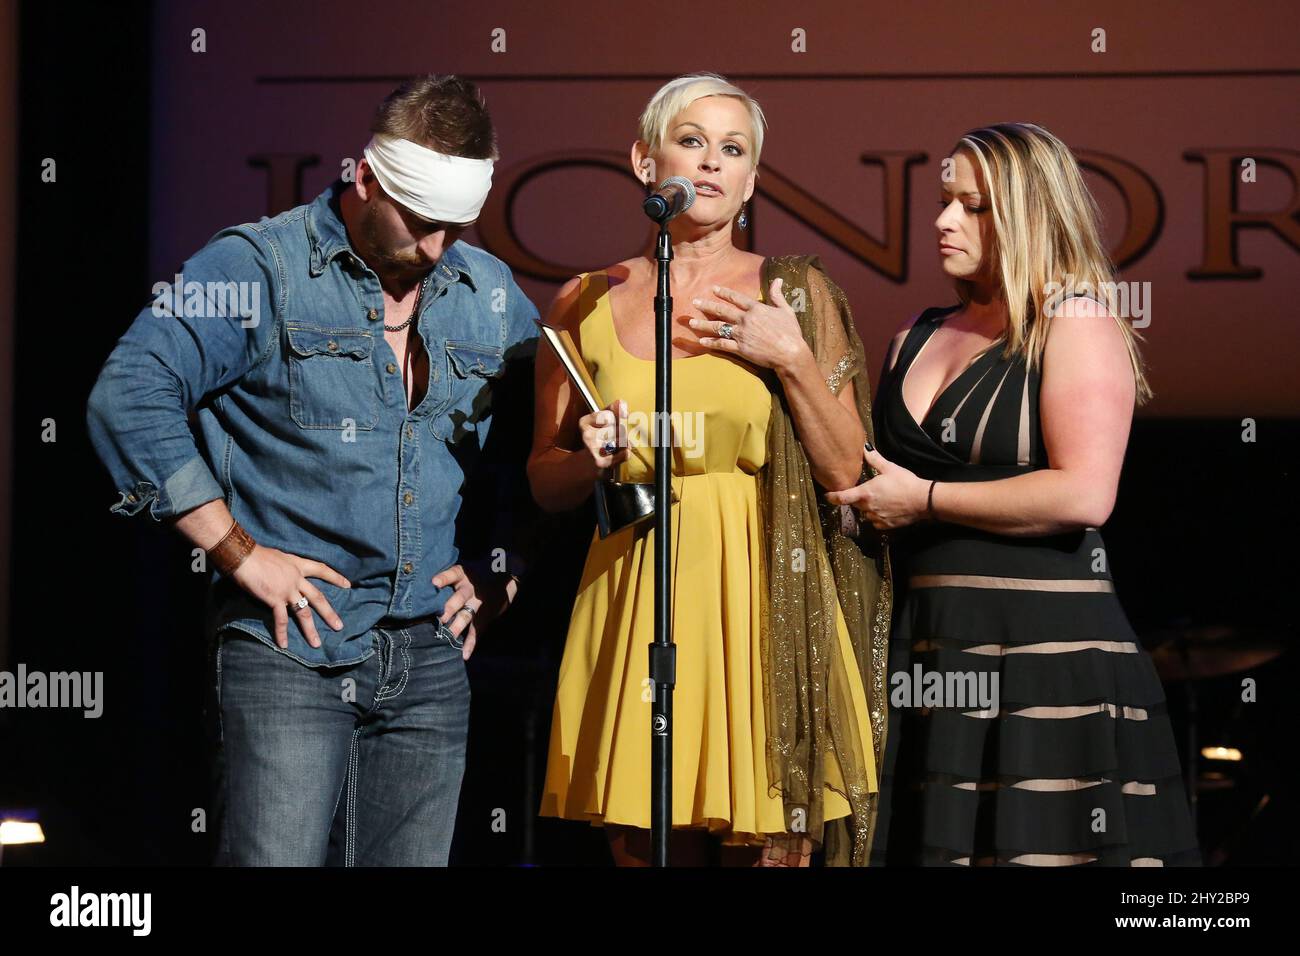 Jesse Keith Whitley,Lorrie Morgan,Morgan Gaddis attends the 7th Annual ACM Honors held at the Ryman Auditorium, Nashville, on September 10, 2013. Stock Photo